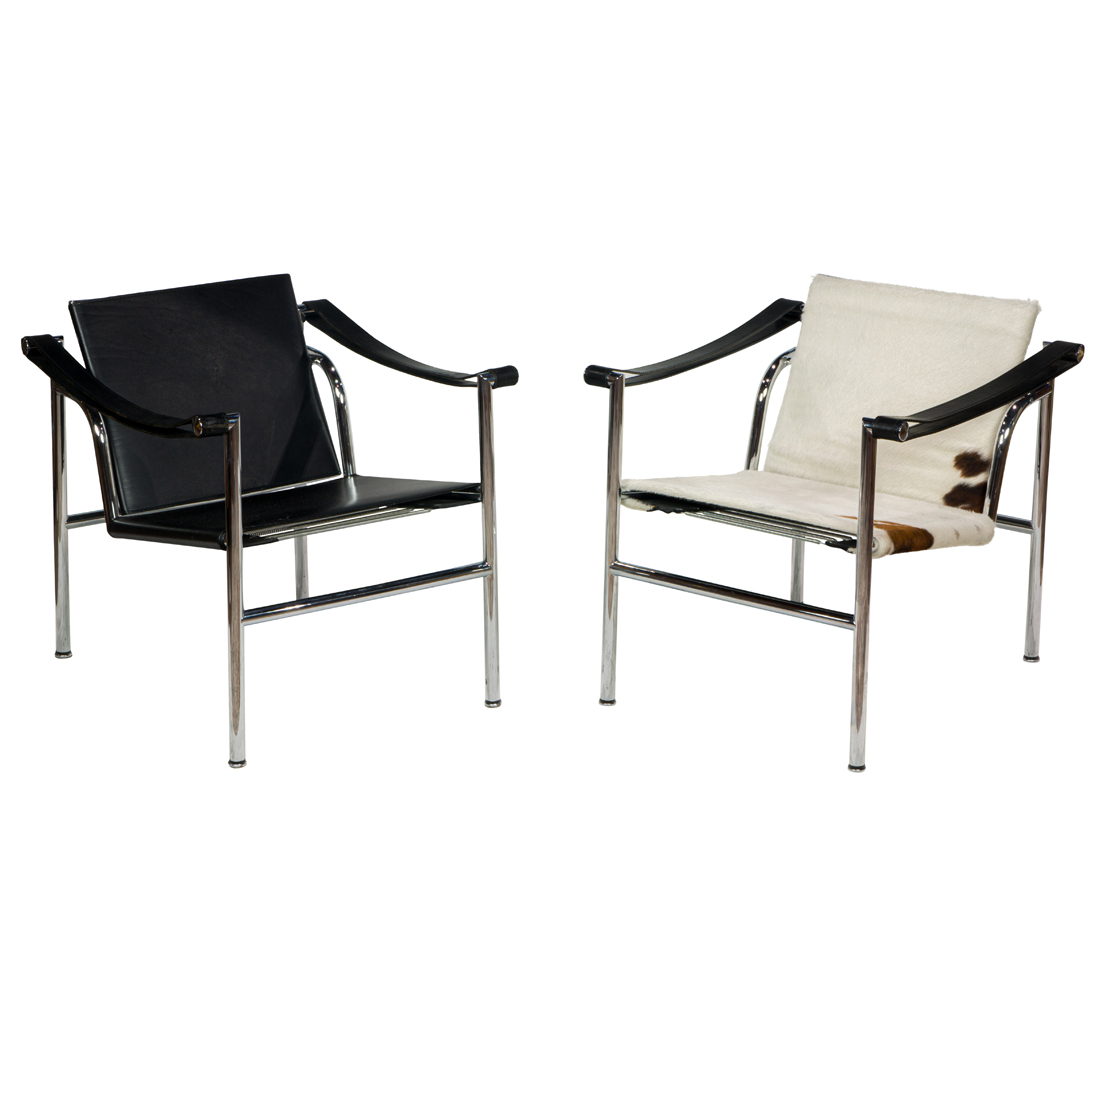 CHARLOTTE PERRIAND PIERRE JEANNERET 3a17ac